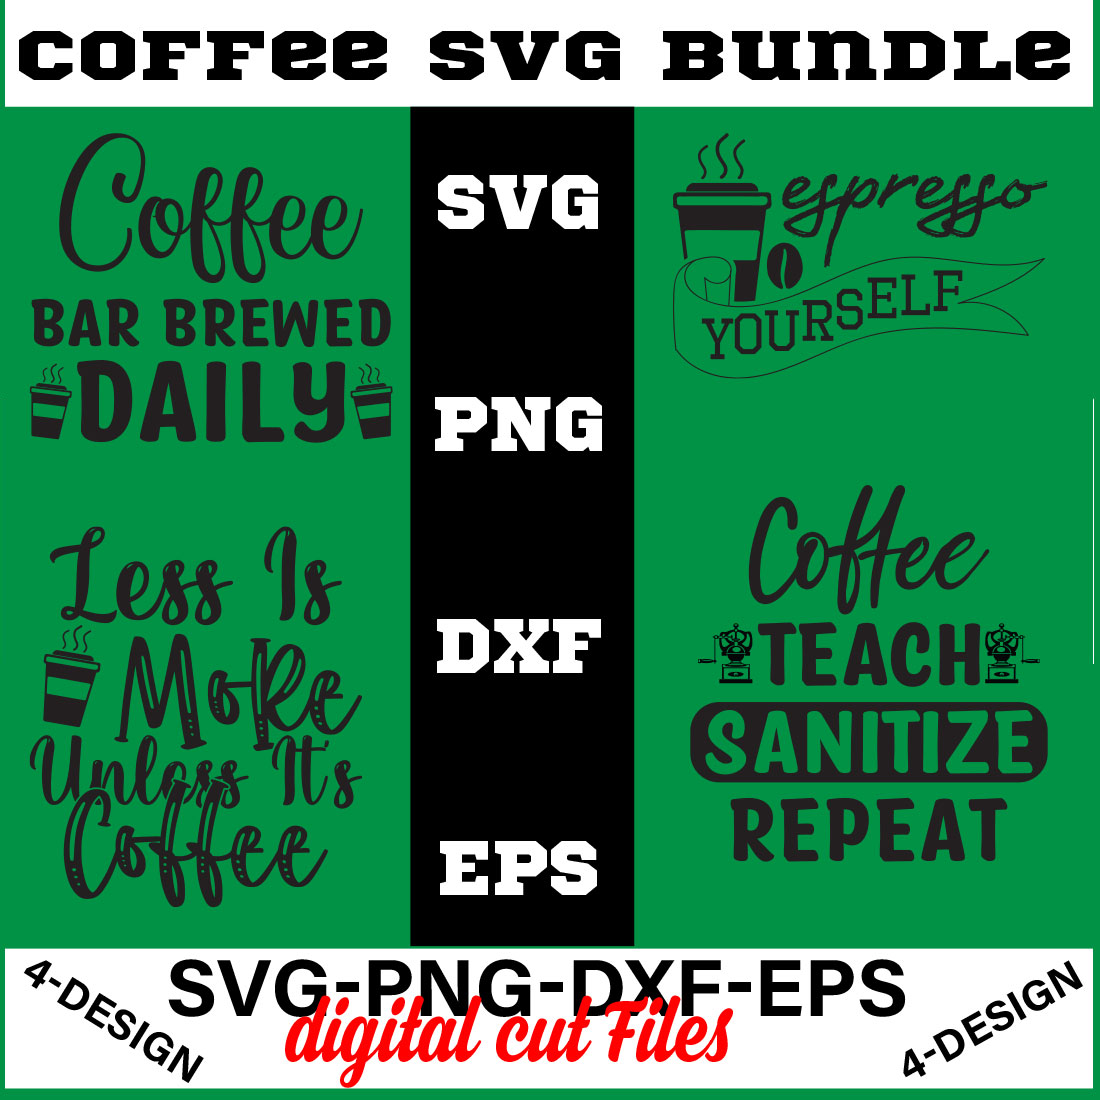 Coffee SVG Bundle, Funny Coffee SVG, Coffee Quote Svg, Caffeine Queen, Coffee Lovers, Coffee Obsessed Volume-12 cover image.